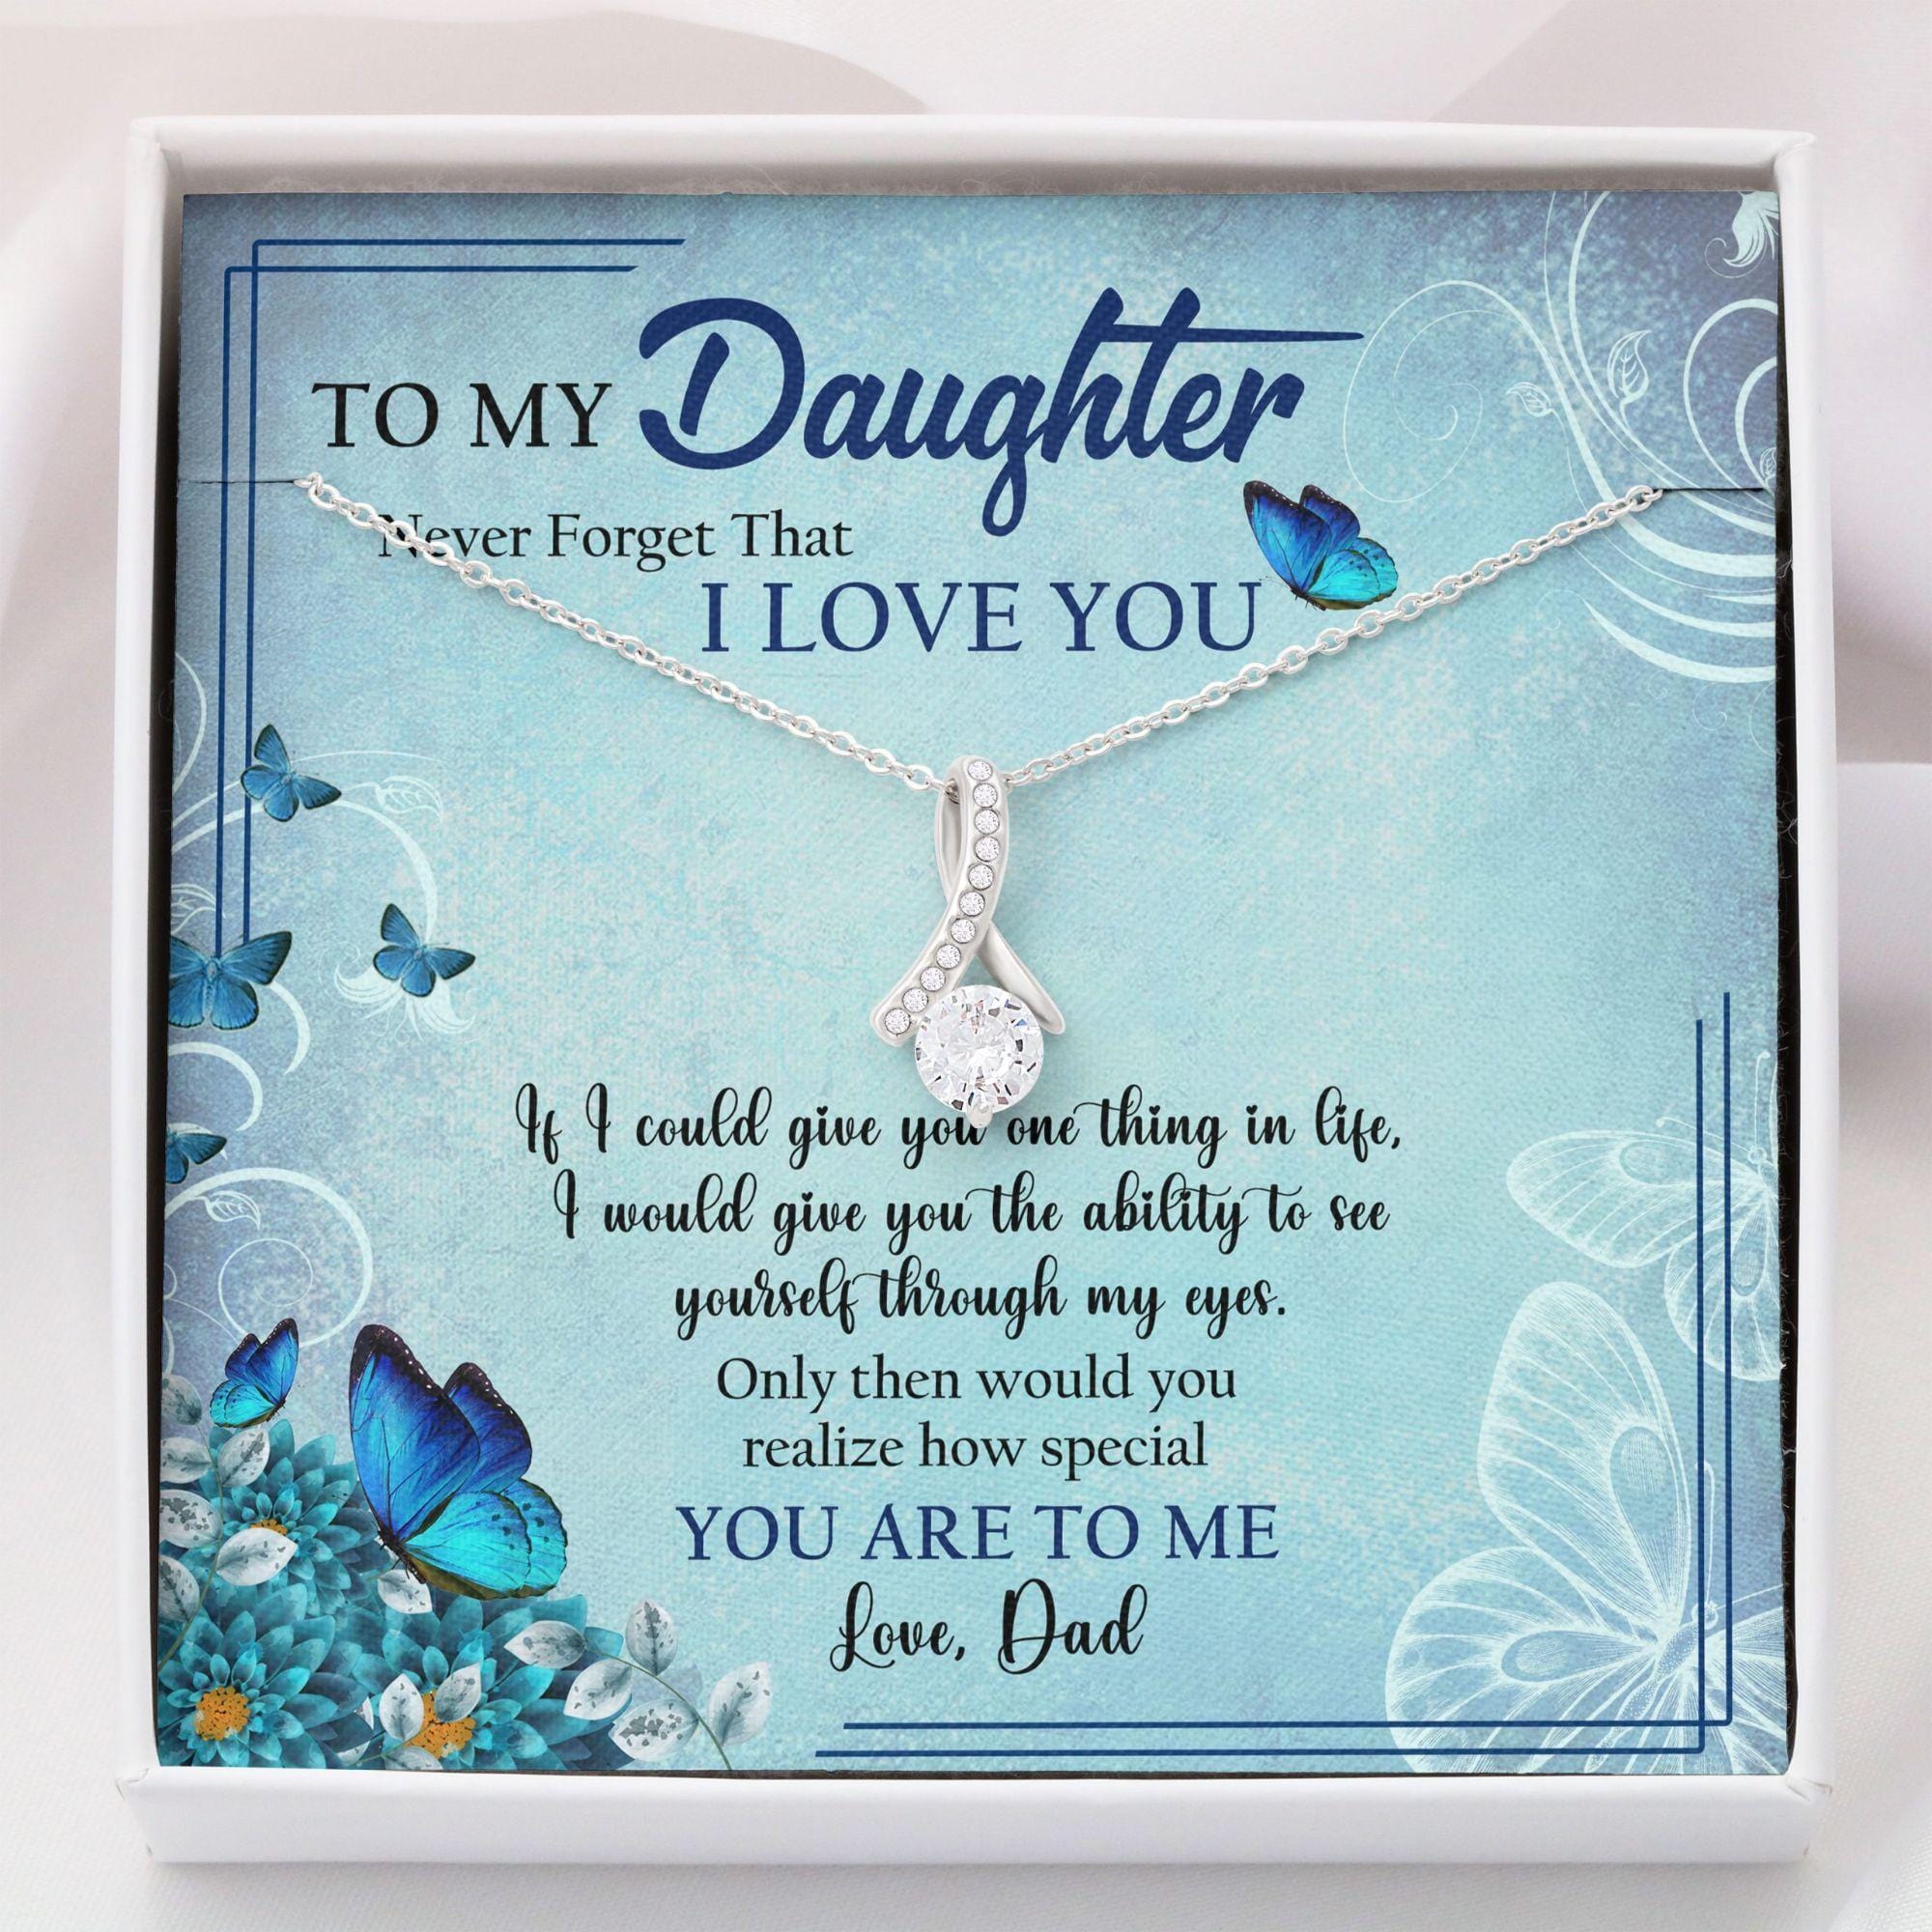 To My Daughter Necklace From Dad - Never Forget That I Love You